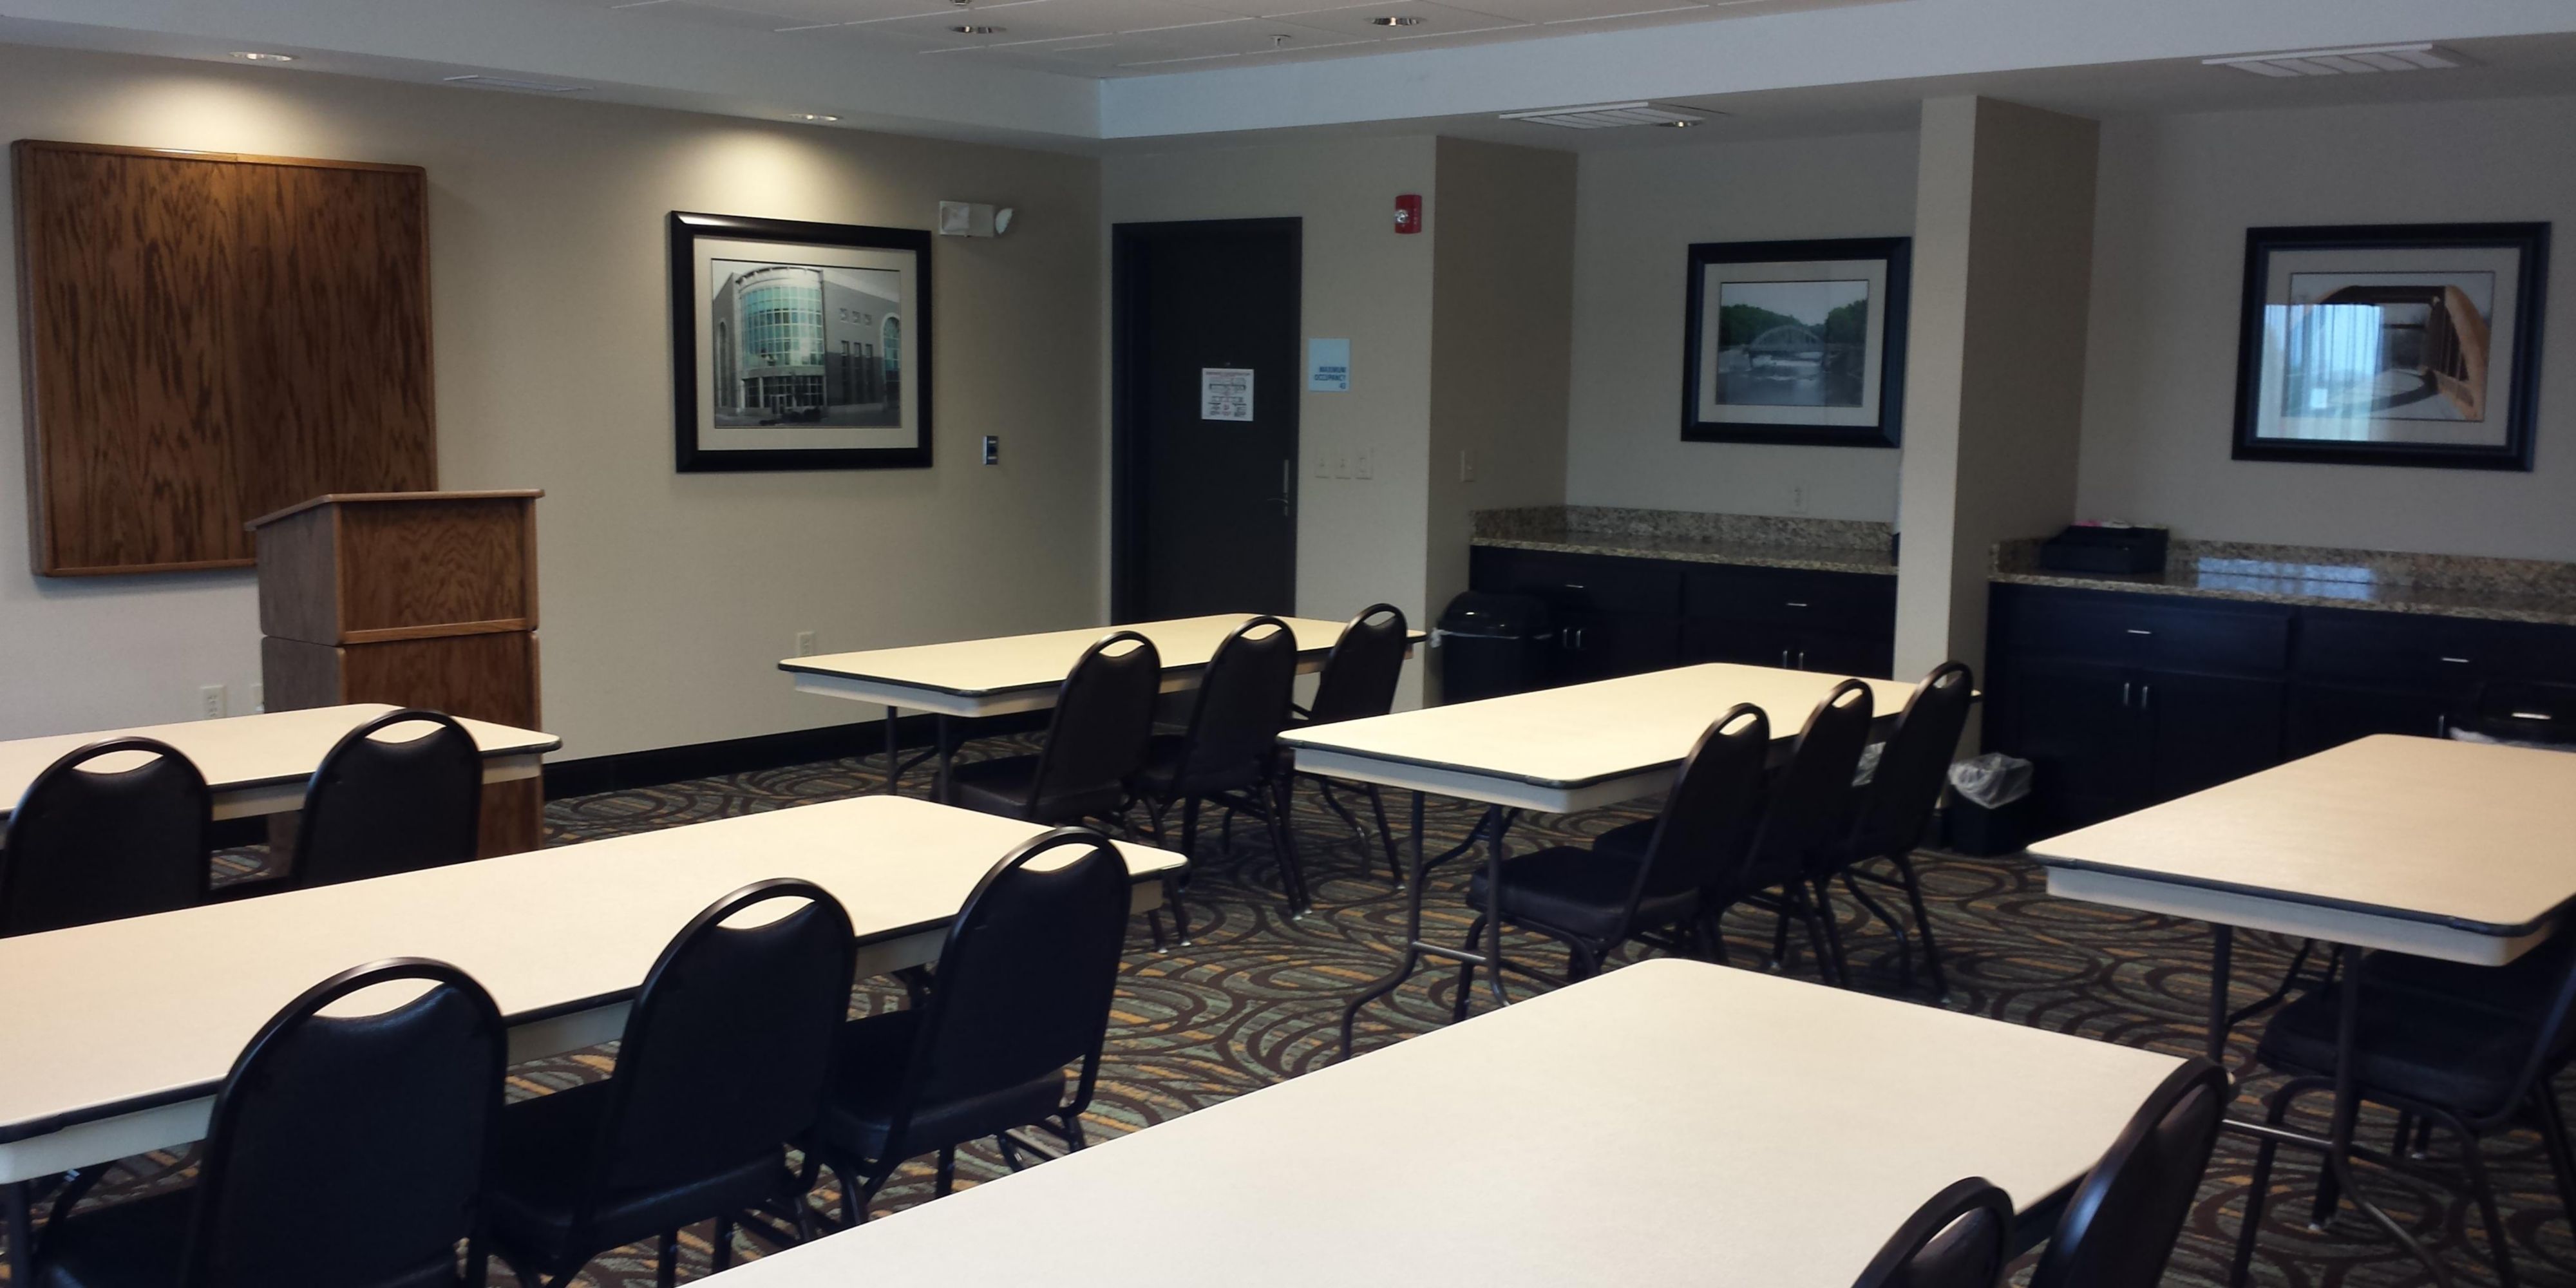 Host a formal business meeting or a unique special occasion in our versatile meeting space. Our hotel offers 580 sq. ft. of space, catering options, and event planning experts. Contact our Sales Office for your next event.